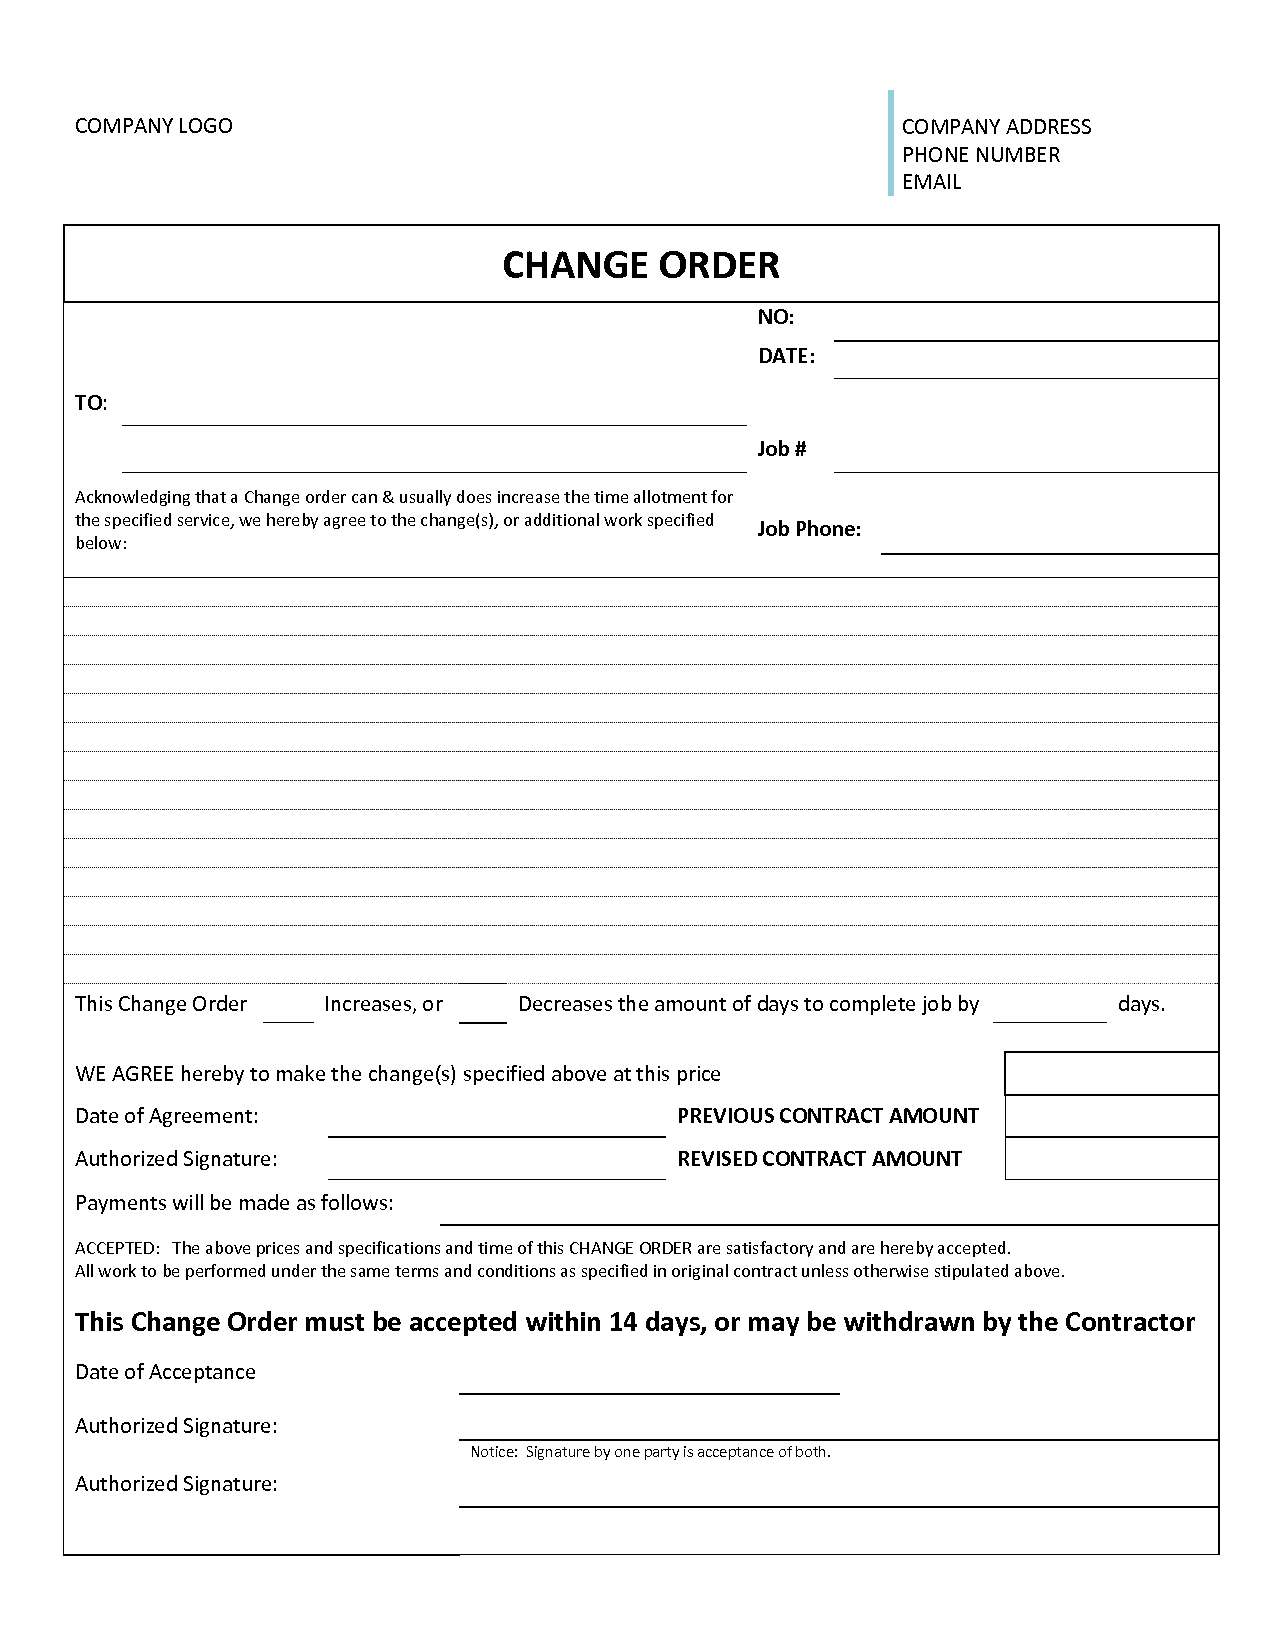 change-order-template-google-docs-printable-word-searches